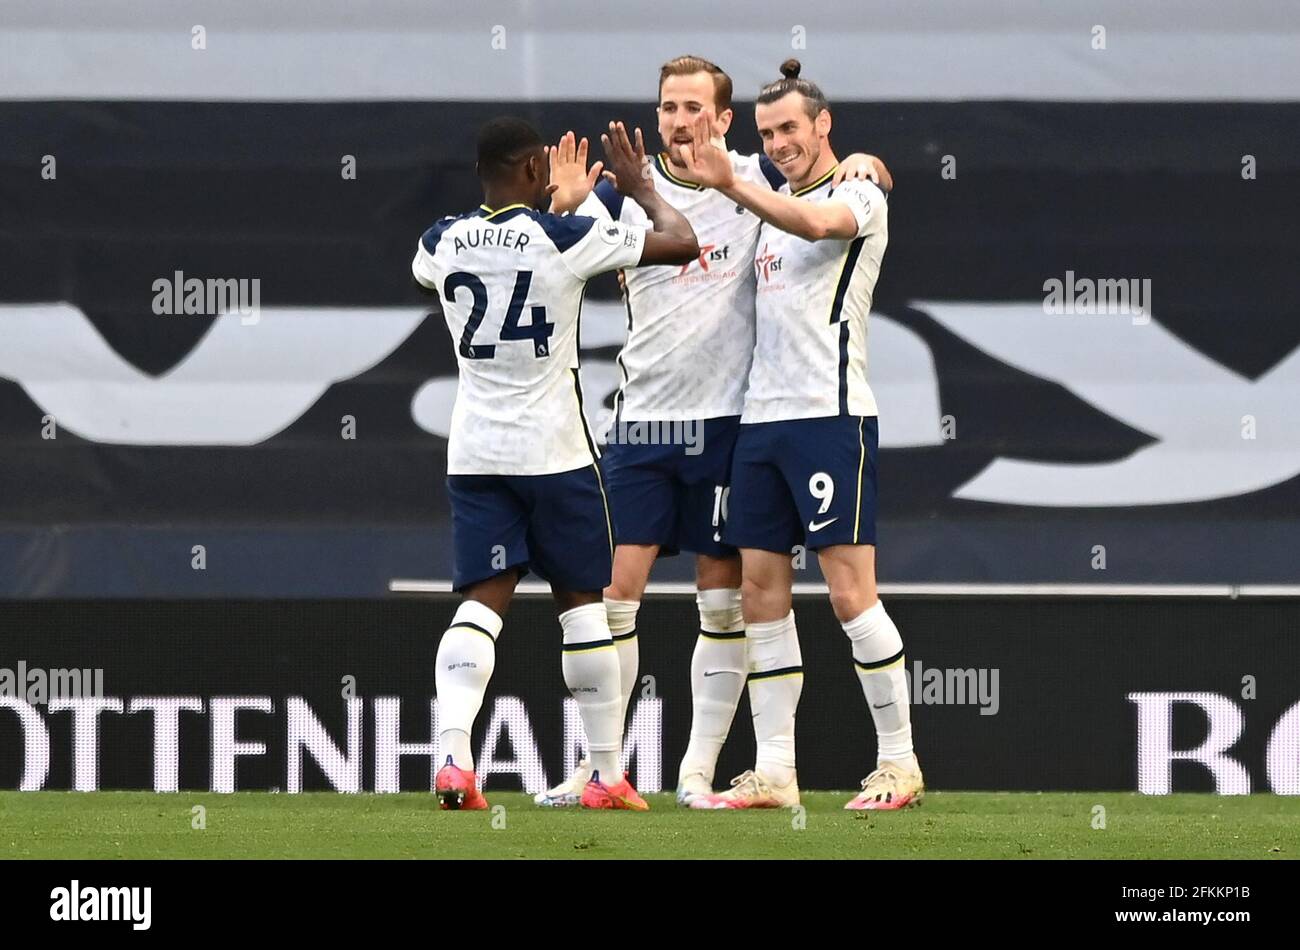 Tottenham Hotspur's Gareth Bale (right) celebrates scoring their side's  first goal of the game with team-mates Serge Aurier and Gareth Bale during  the Premier League match at the Tottenham Hotspur Stadium, London.